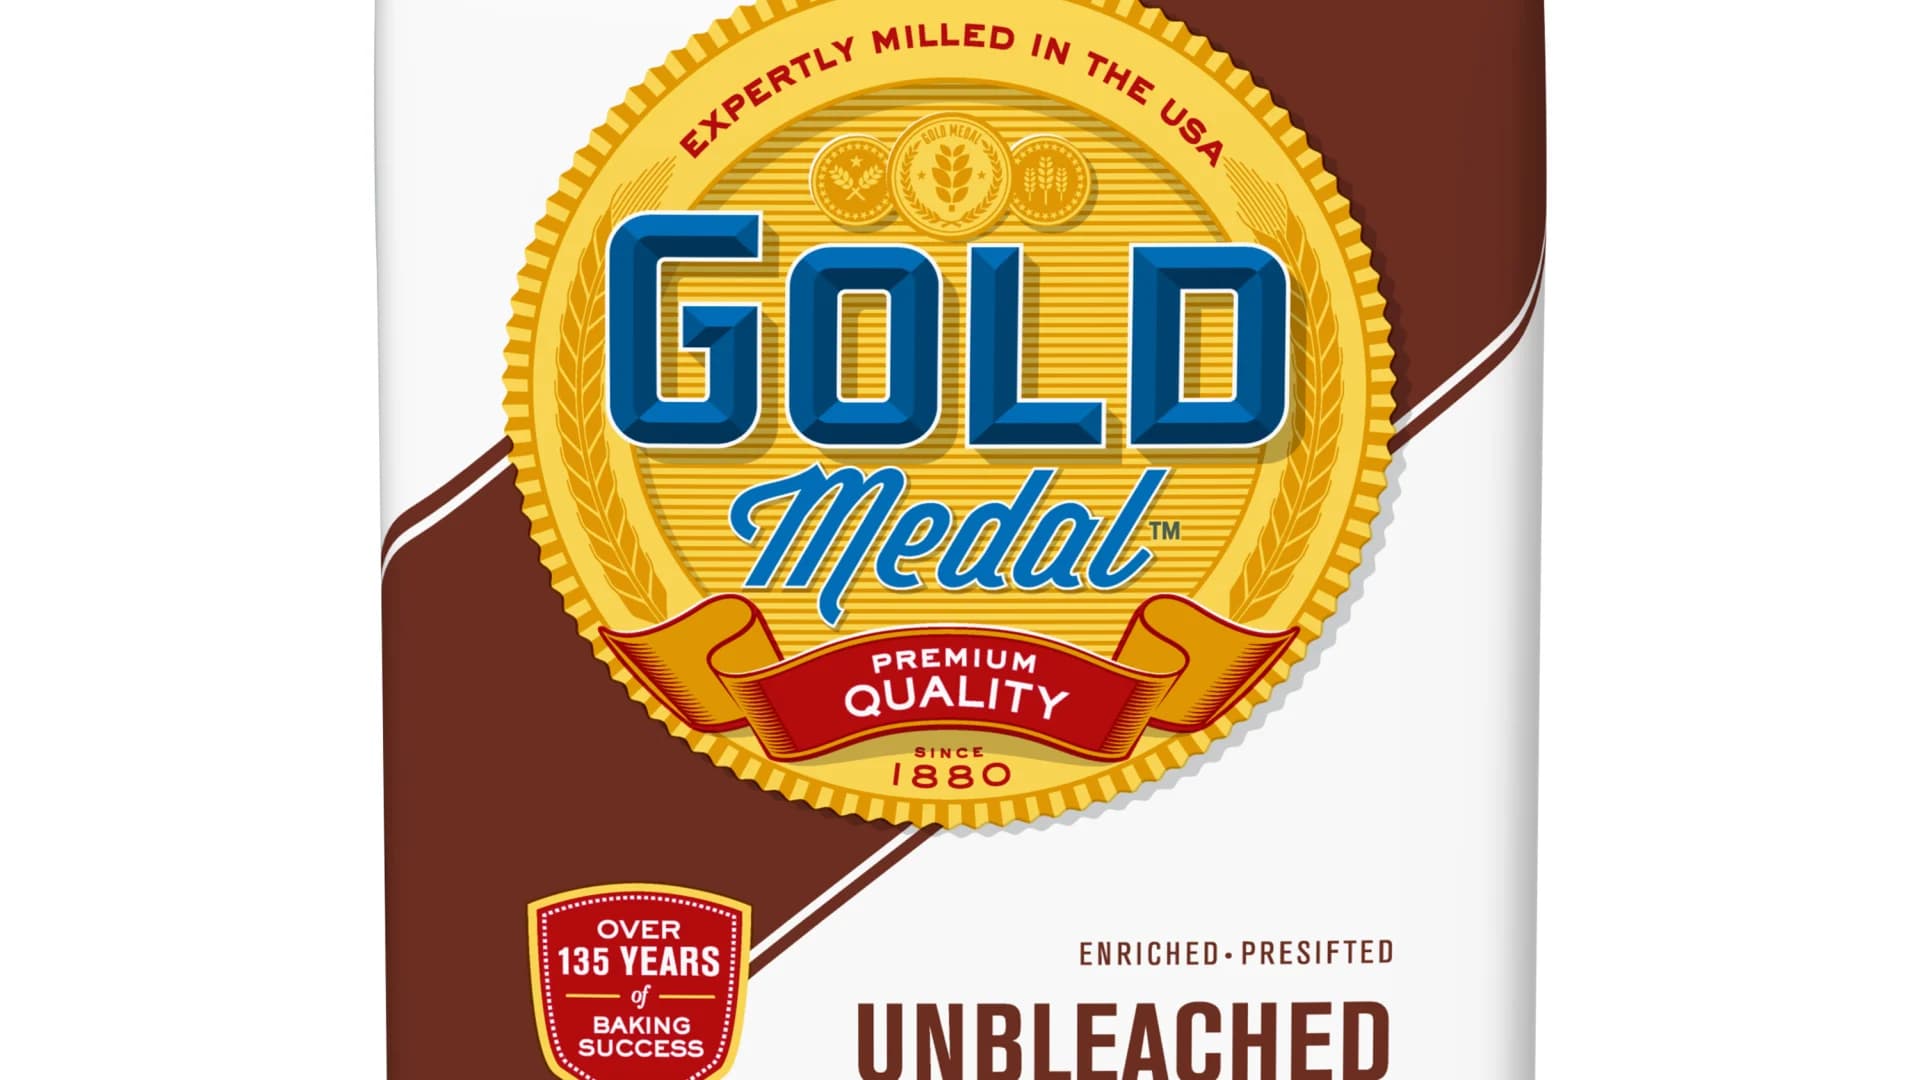 General Mills issues recall for various Gold Medal flour products due to salmonella contamination